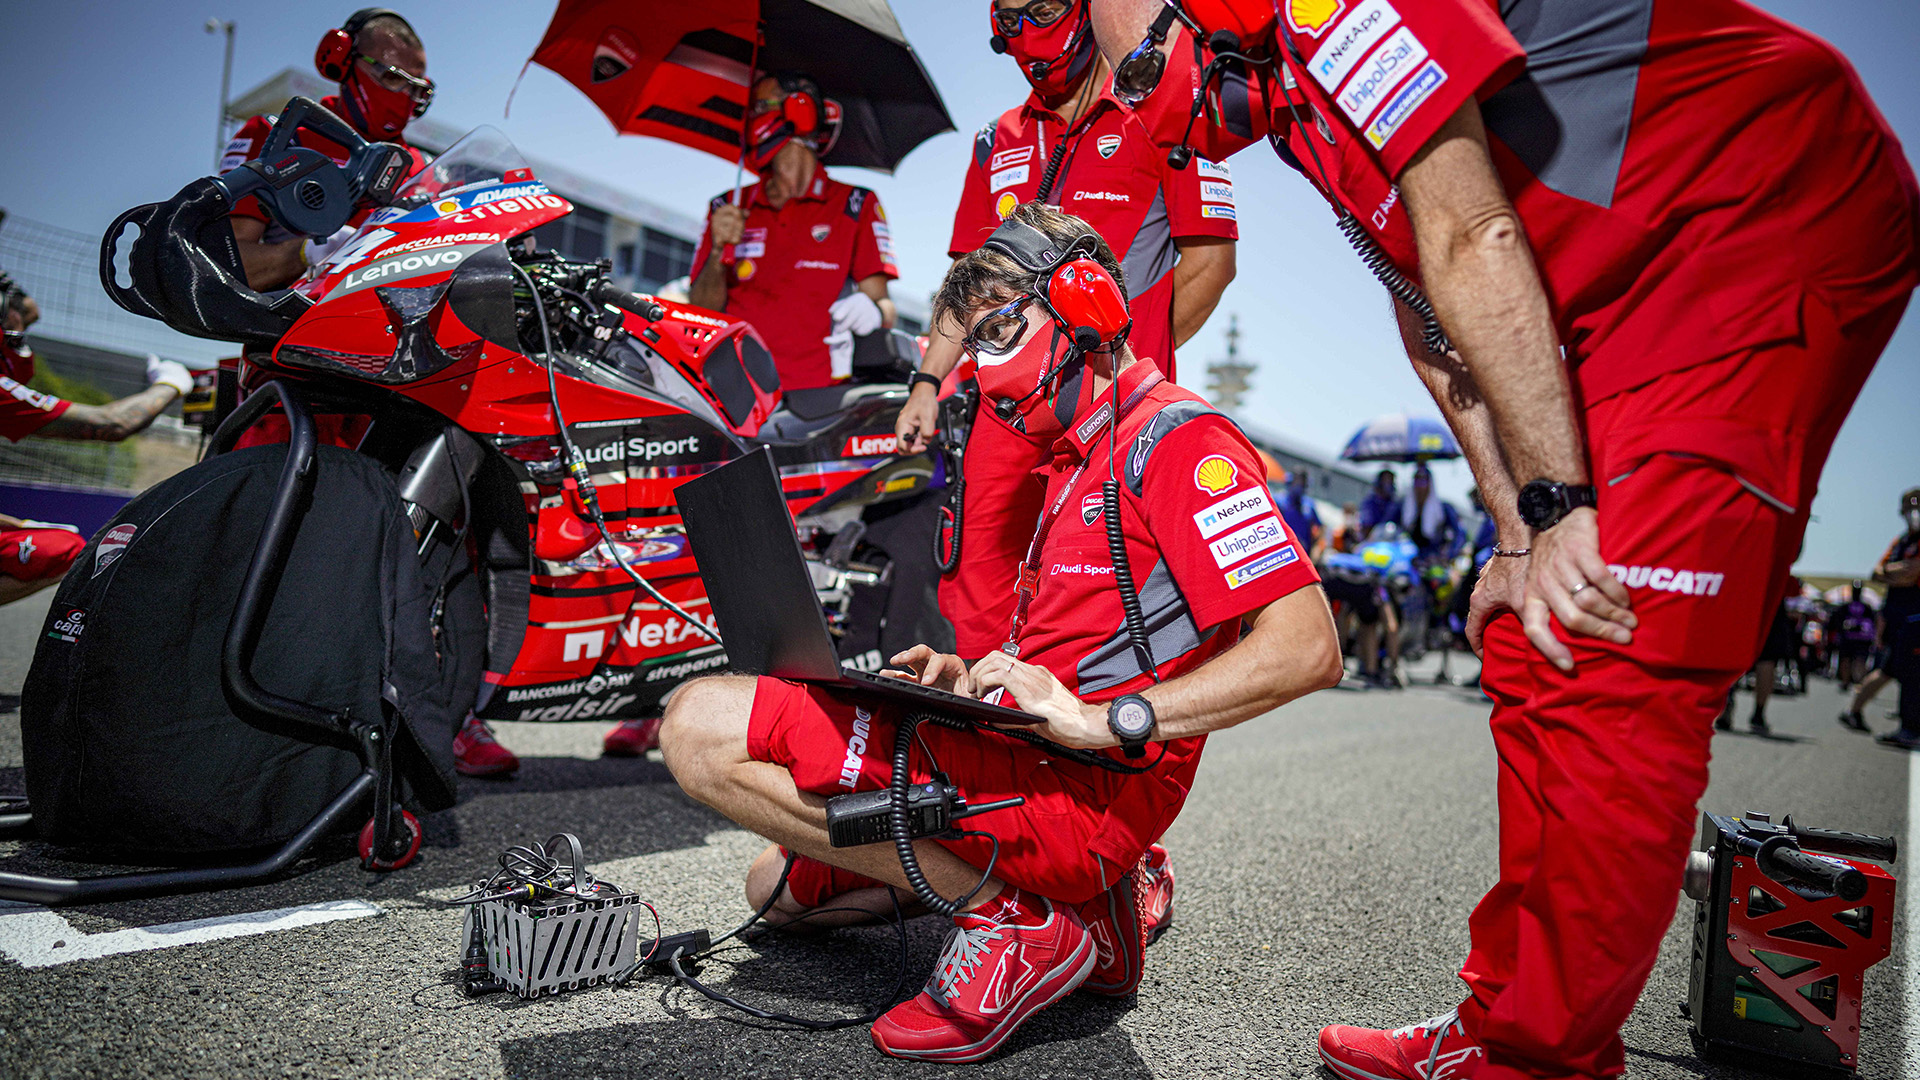 Ducati team using ThinkPad laptop by the racetrack